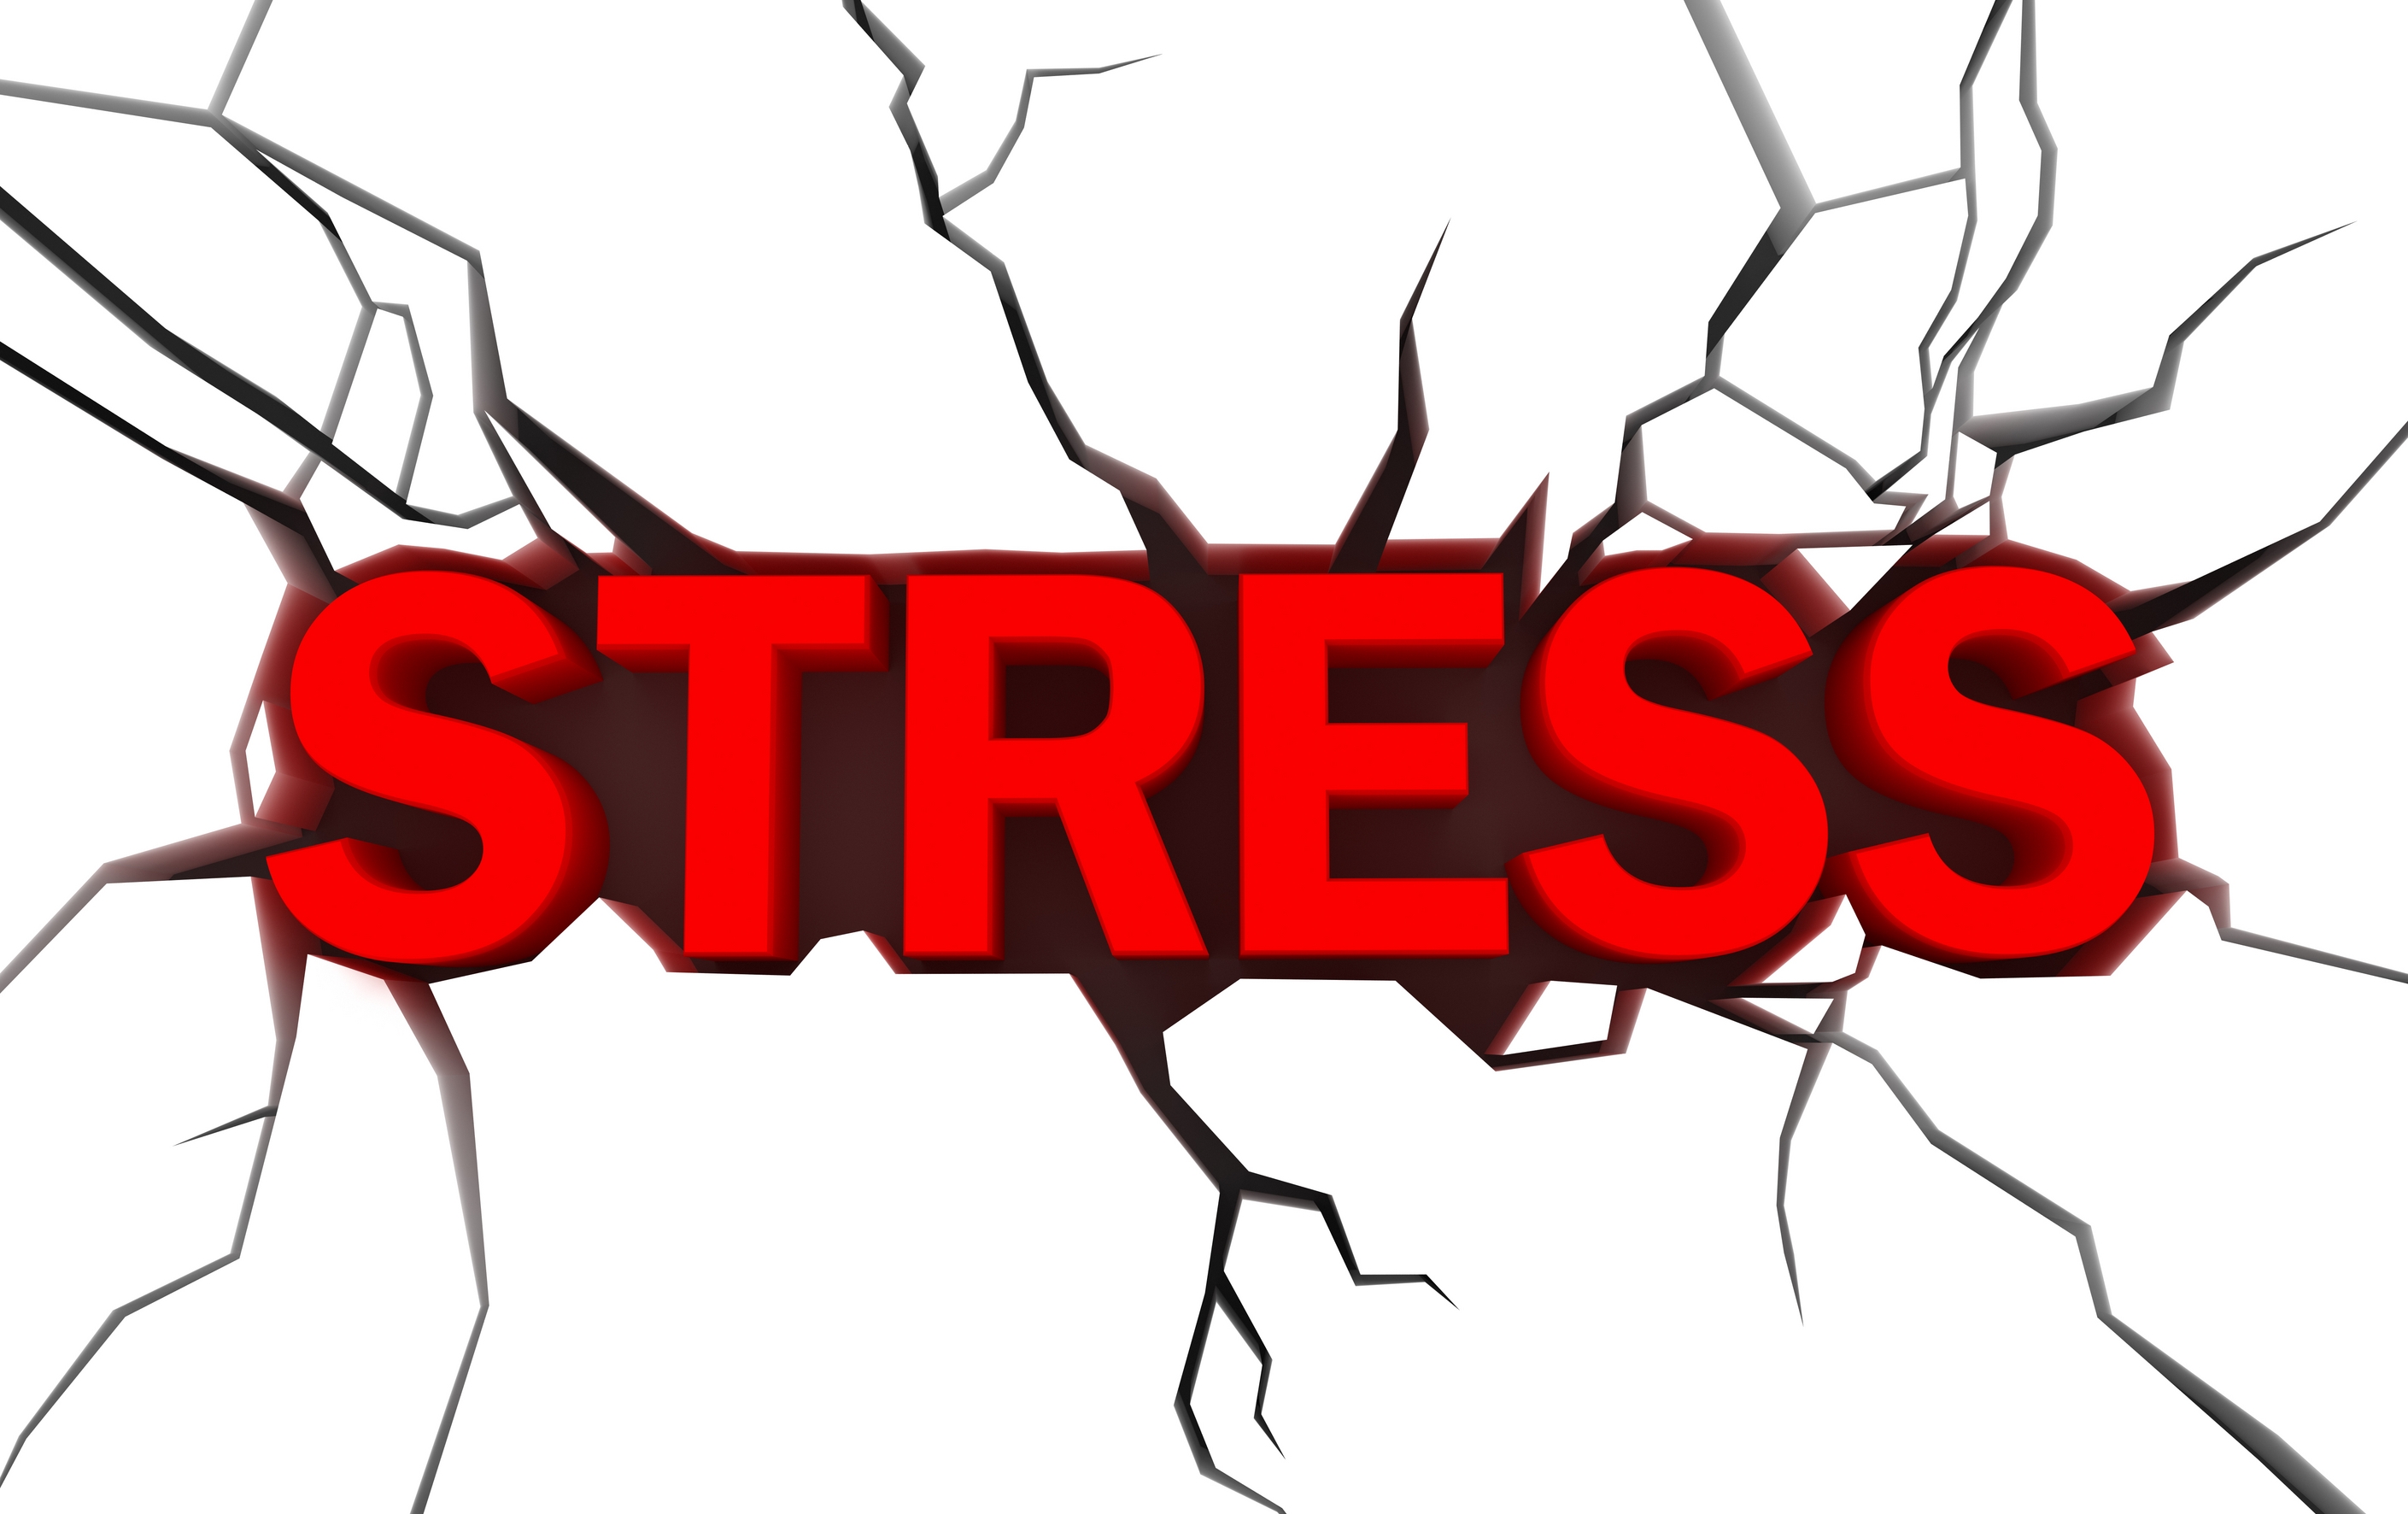 Stress Management - Break Free From a Stressful Lifestyle